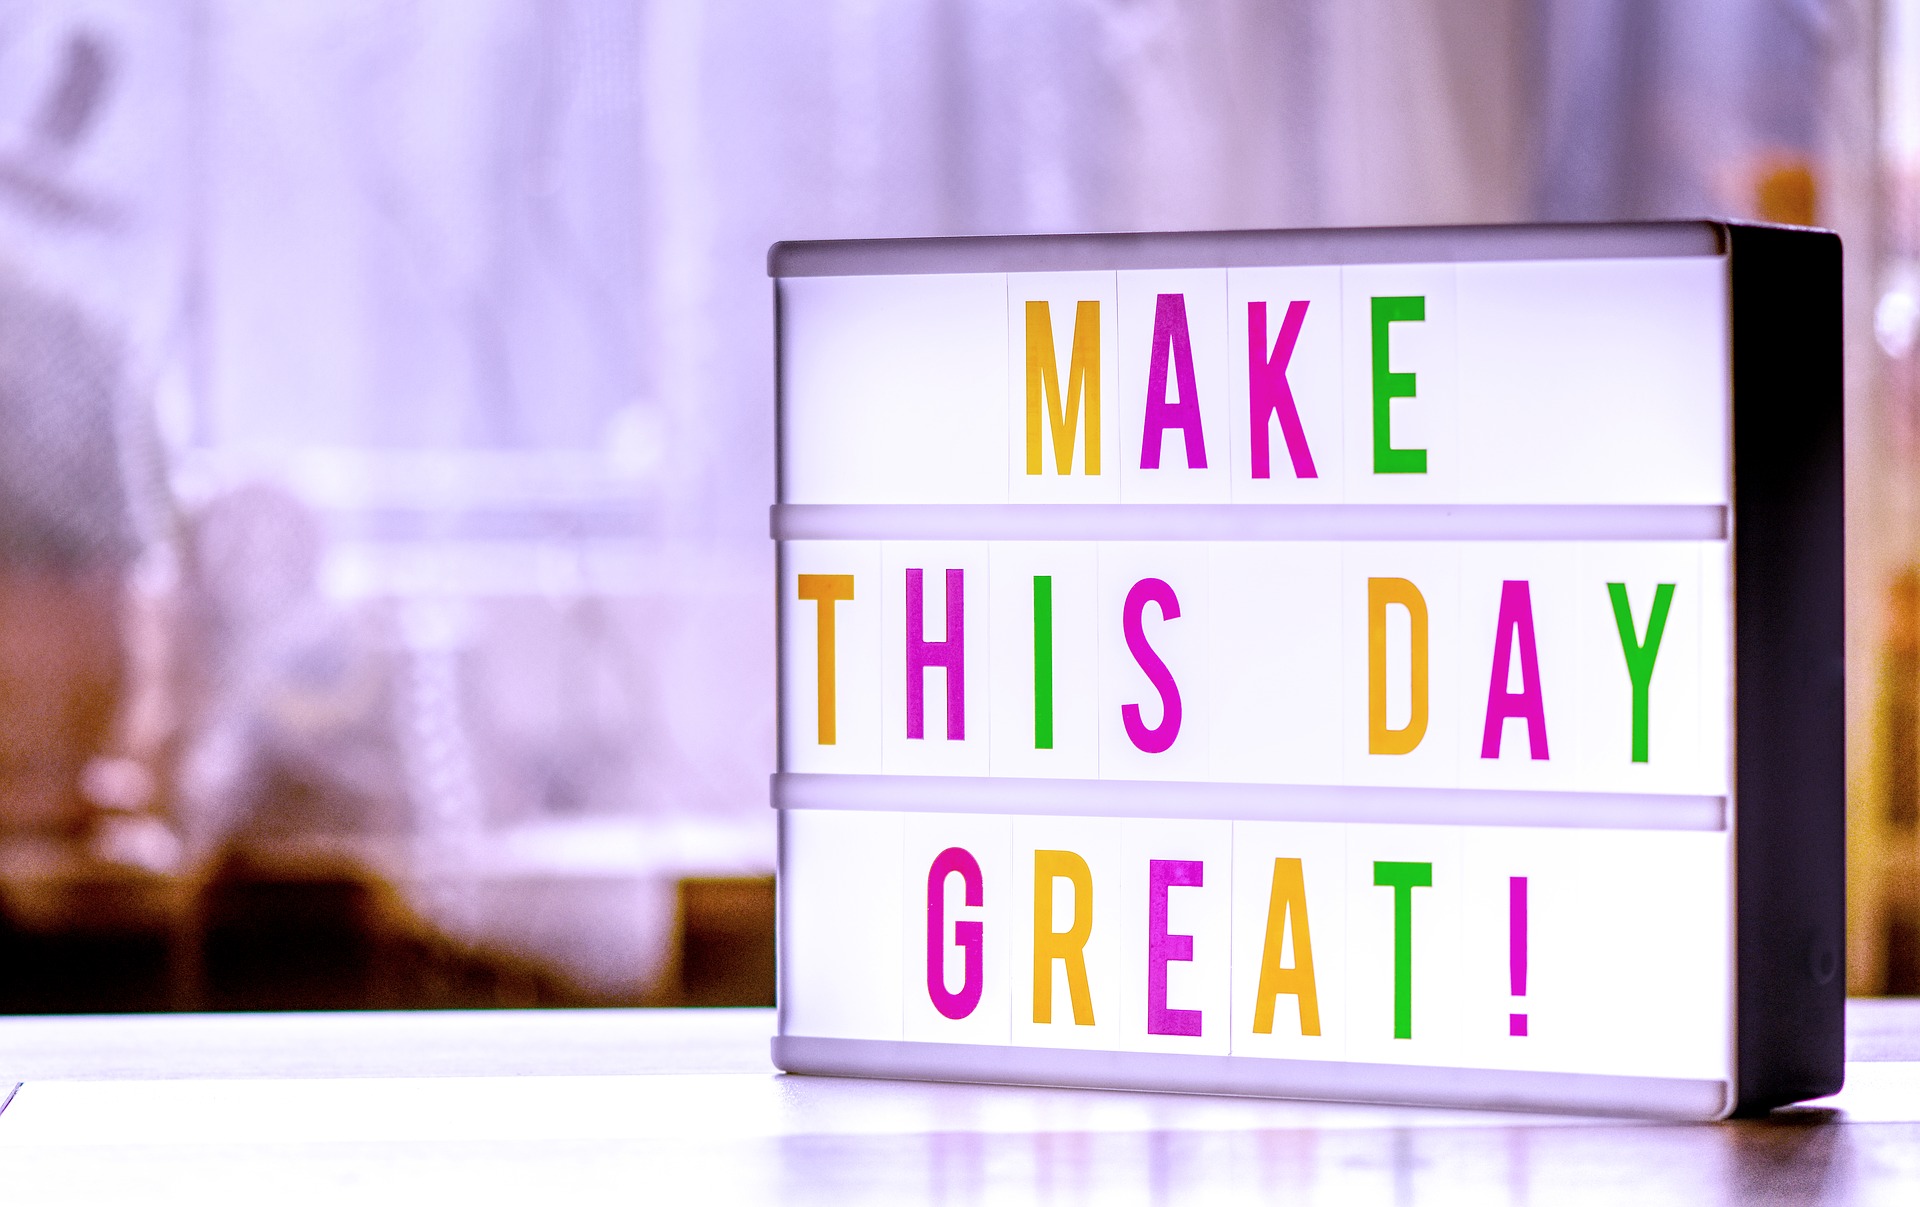 A bright motivational sign sitting on a desk